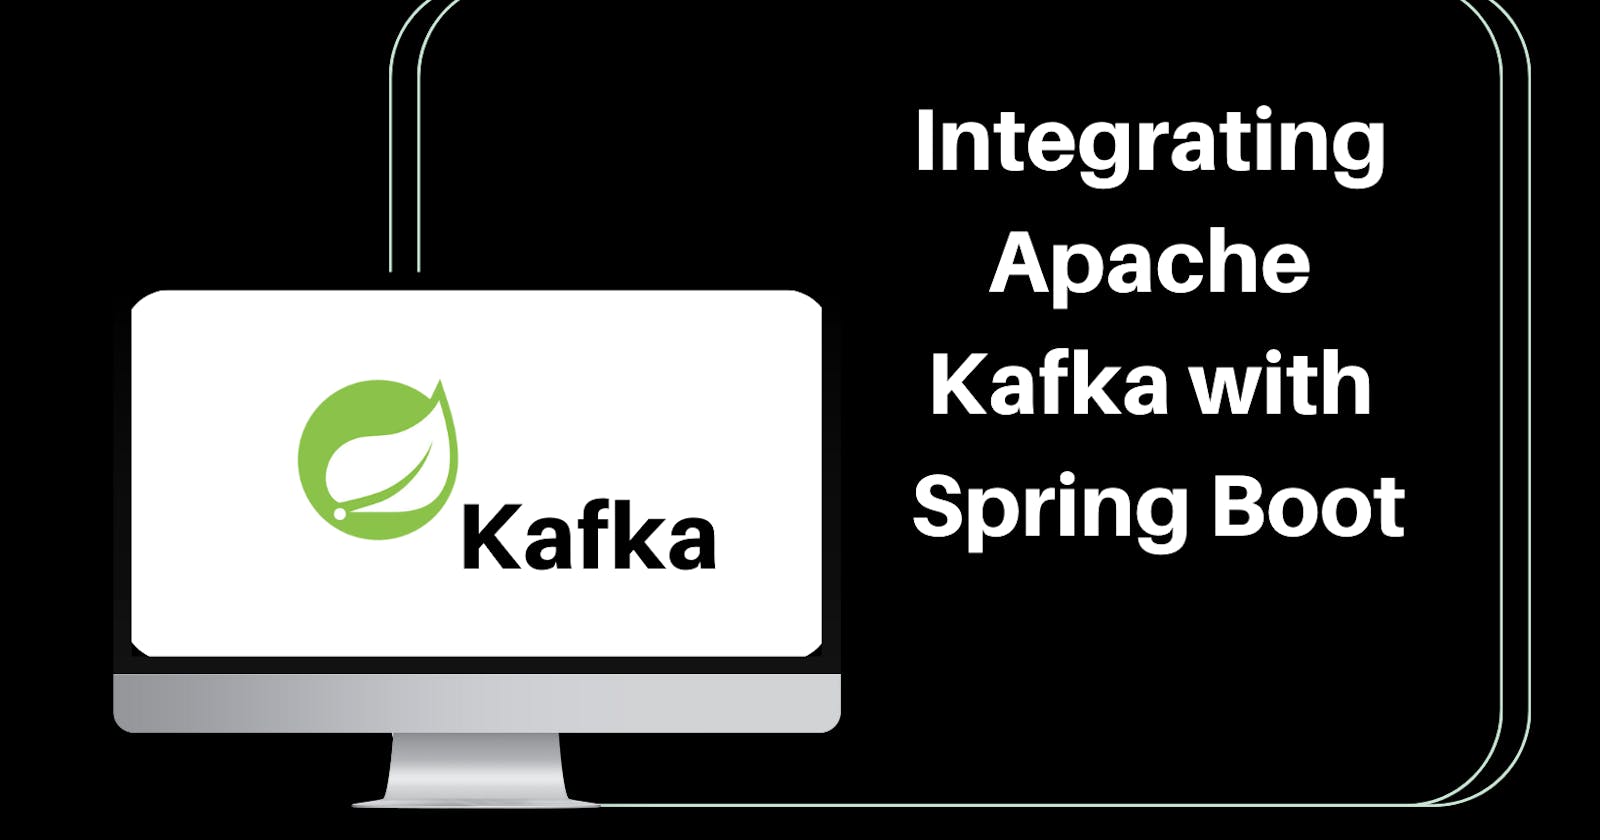 Integrating Apache Kafka with Spring Boot for Business Efficiency